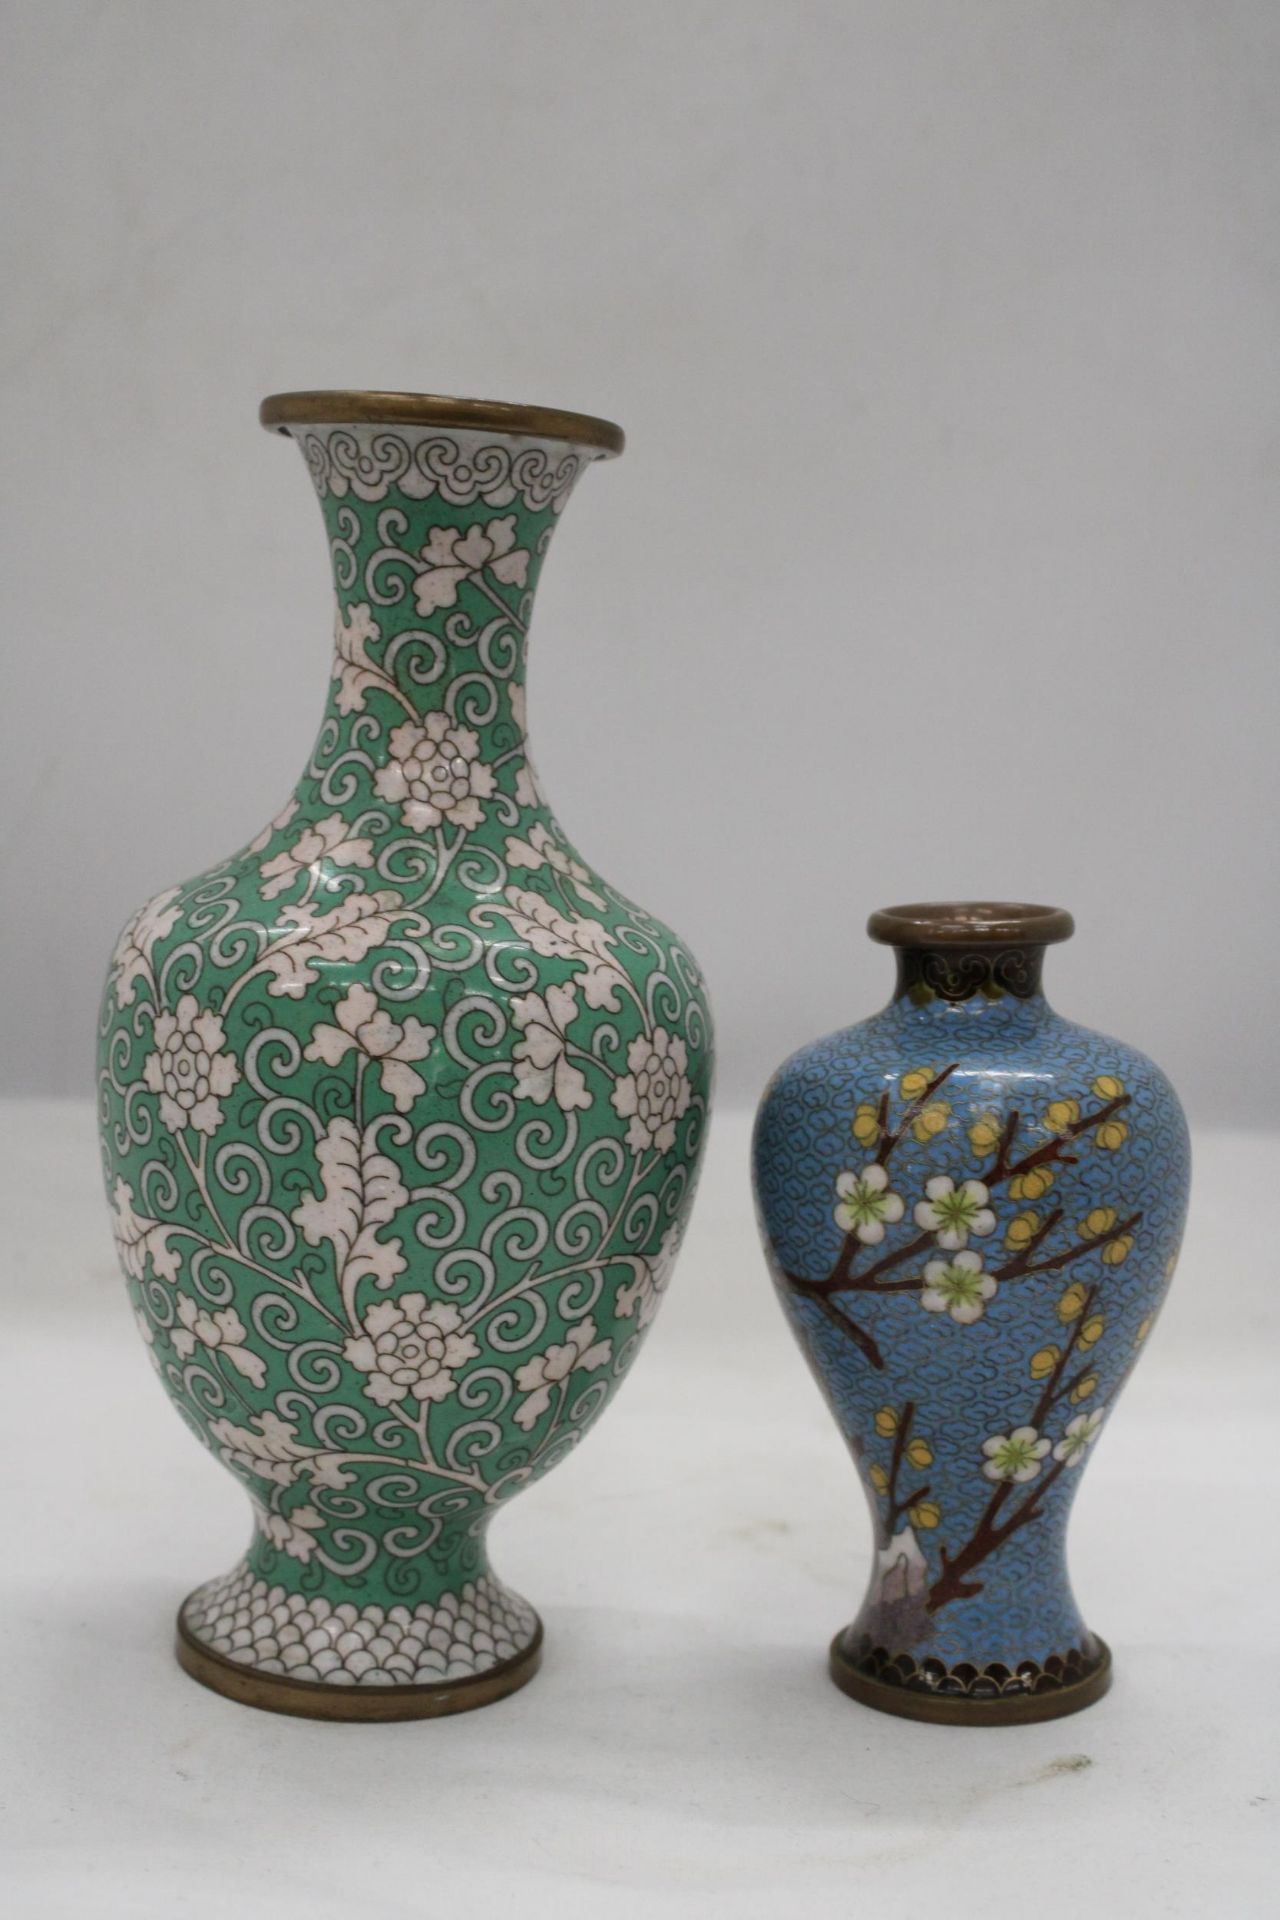 TWO ORIENTAL STYLE CLOISONNE VASES, HEIGHTS 21CM AND 13CM - Image 3 of 5